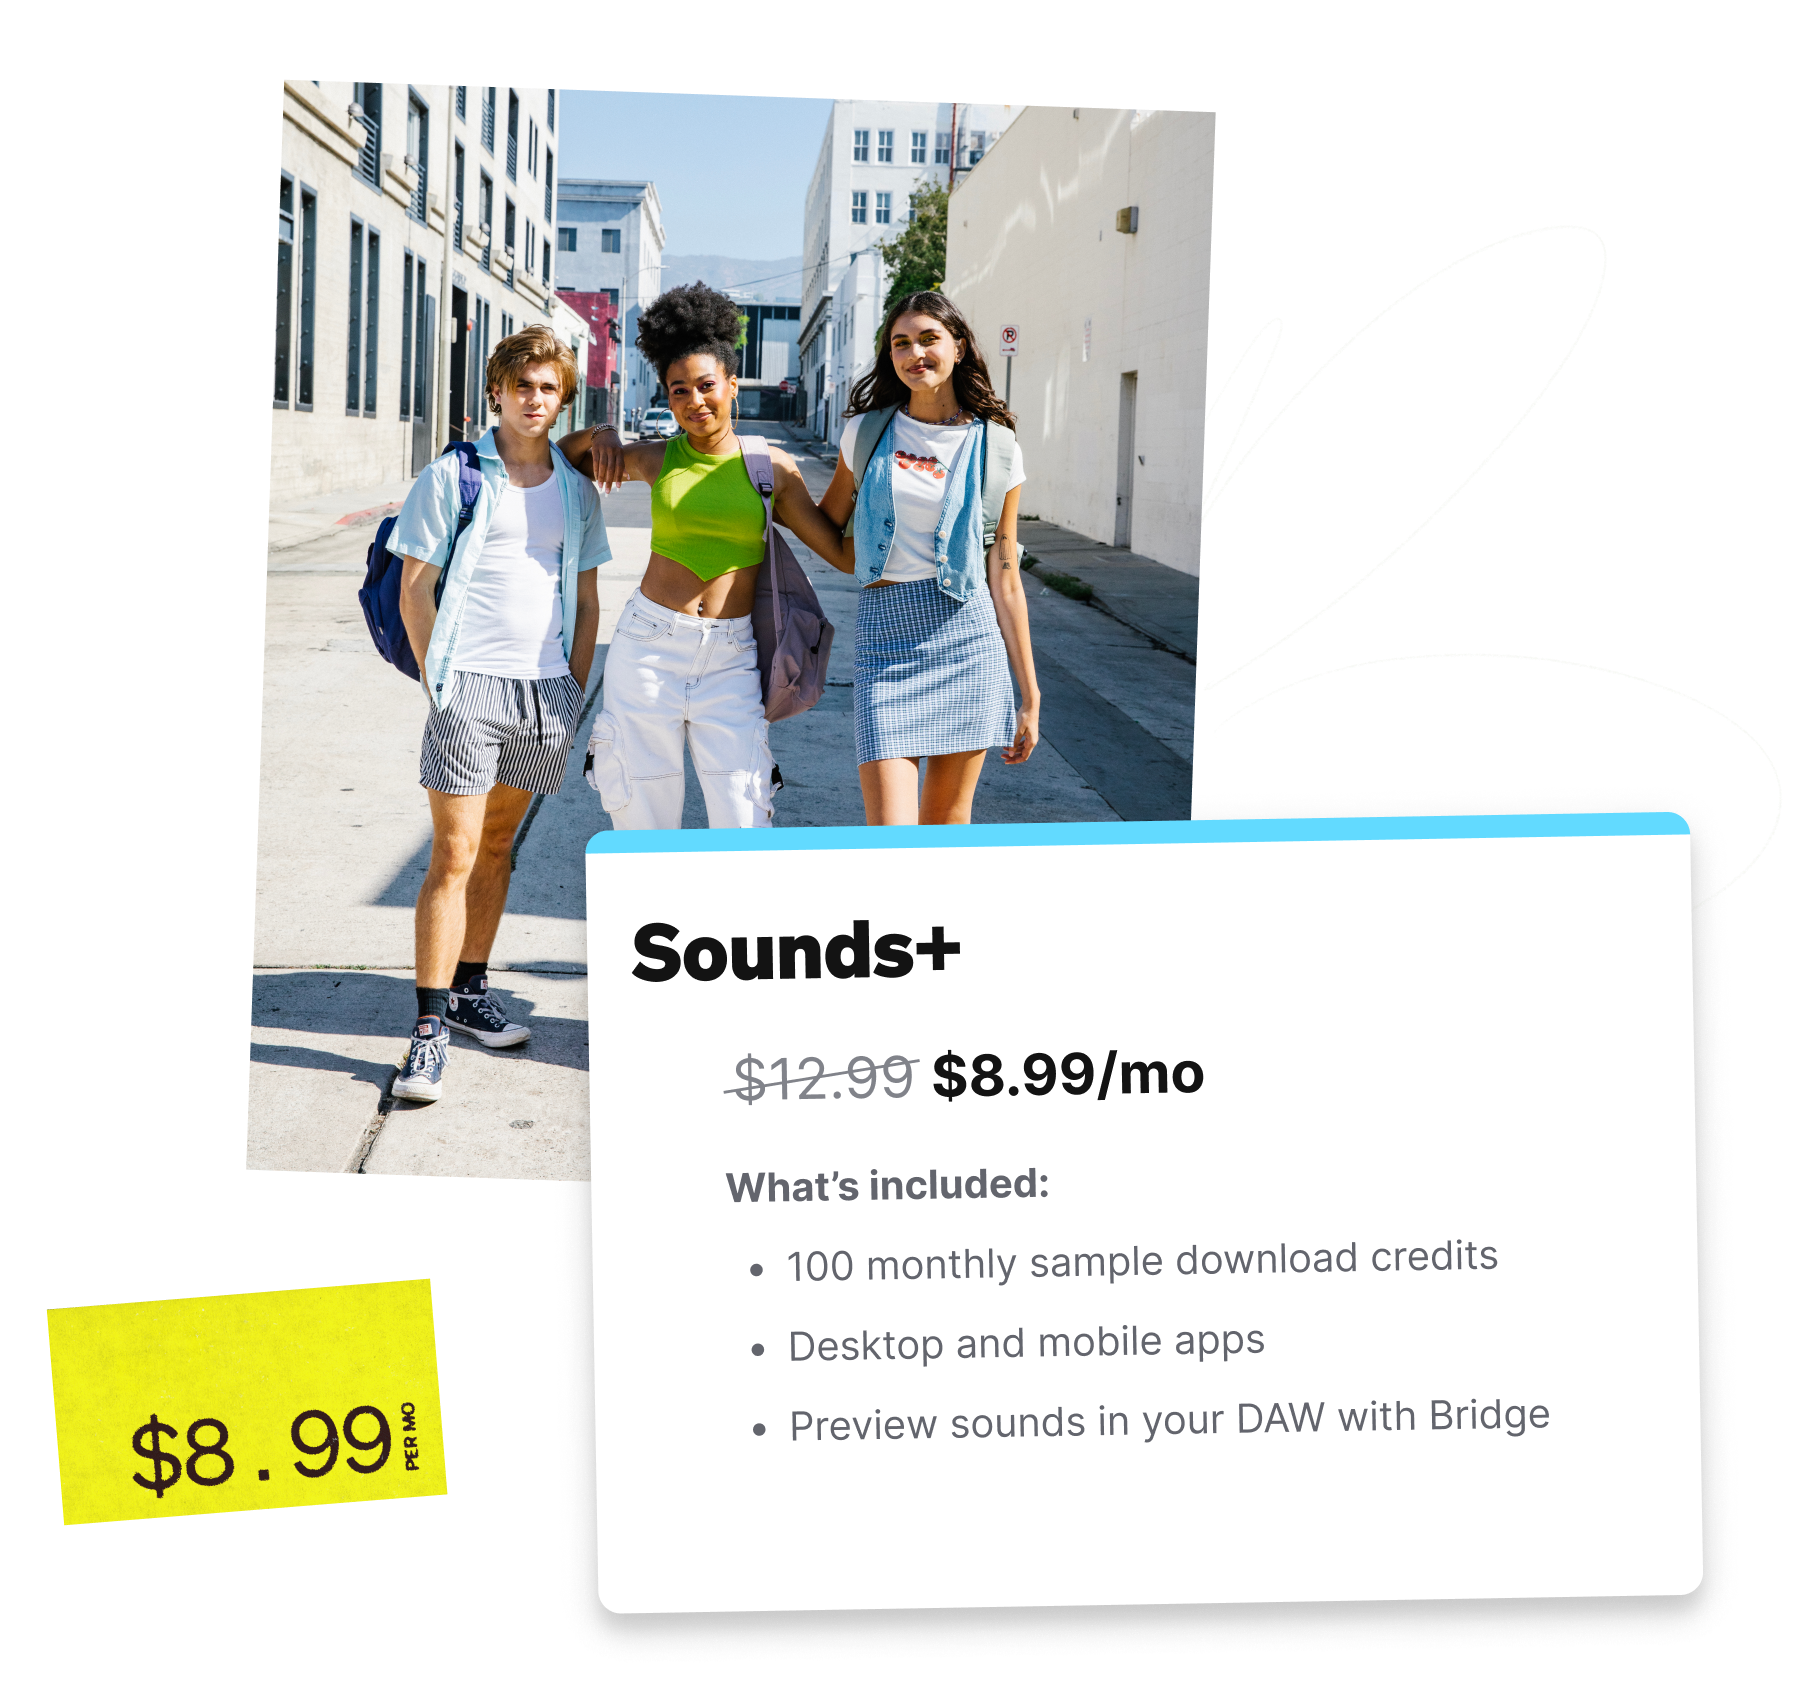 Three students standing next to each other on campus. Below is a banner with some text that reads: "Sounds+: $8.99/mo. What's included: 100 monthly sample download credits, desktop and mobile apps, and the ability to preview sounds in your DAW with Bridge."